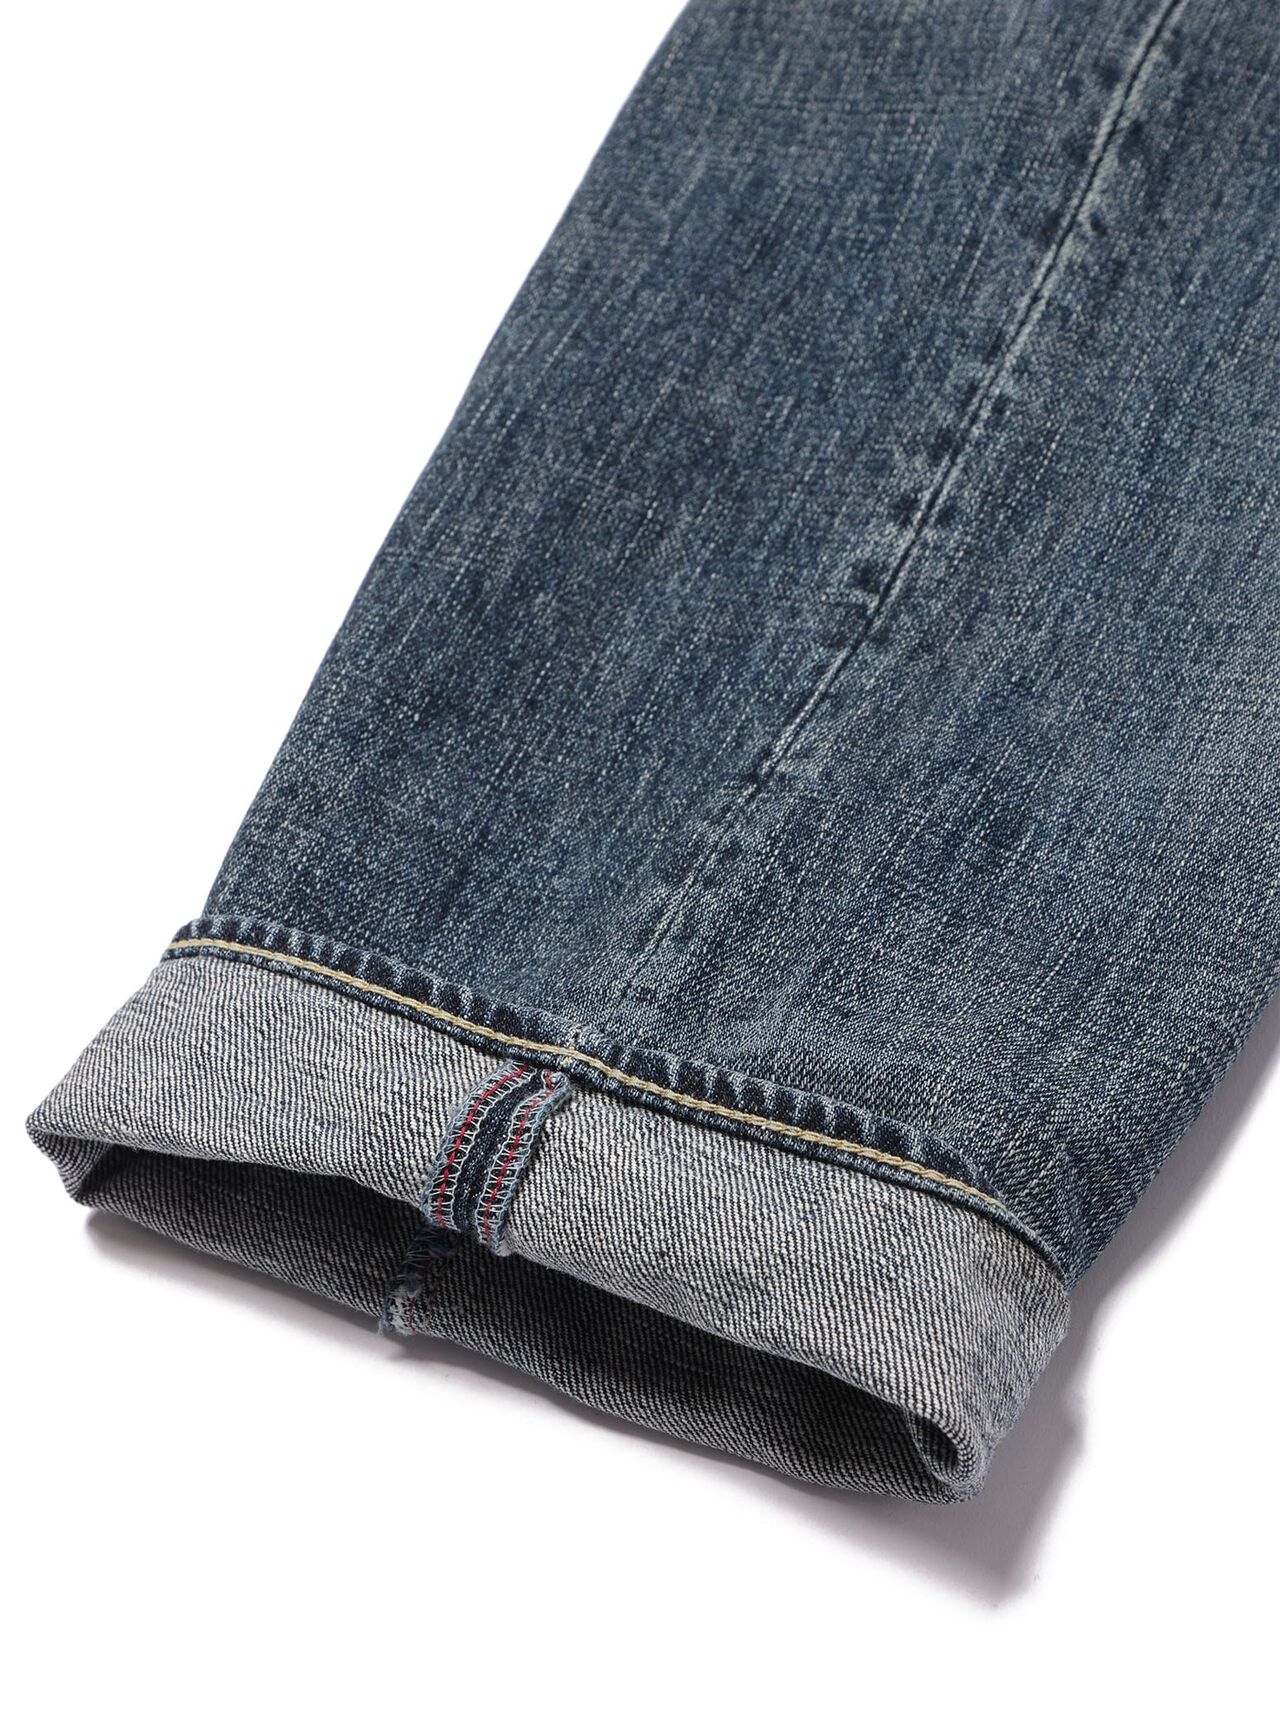 Jeans - Ordinary 22-U2 8 years,, large image number 7